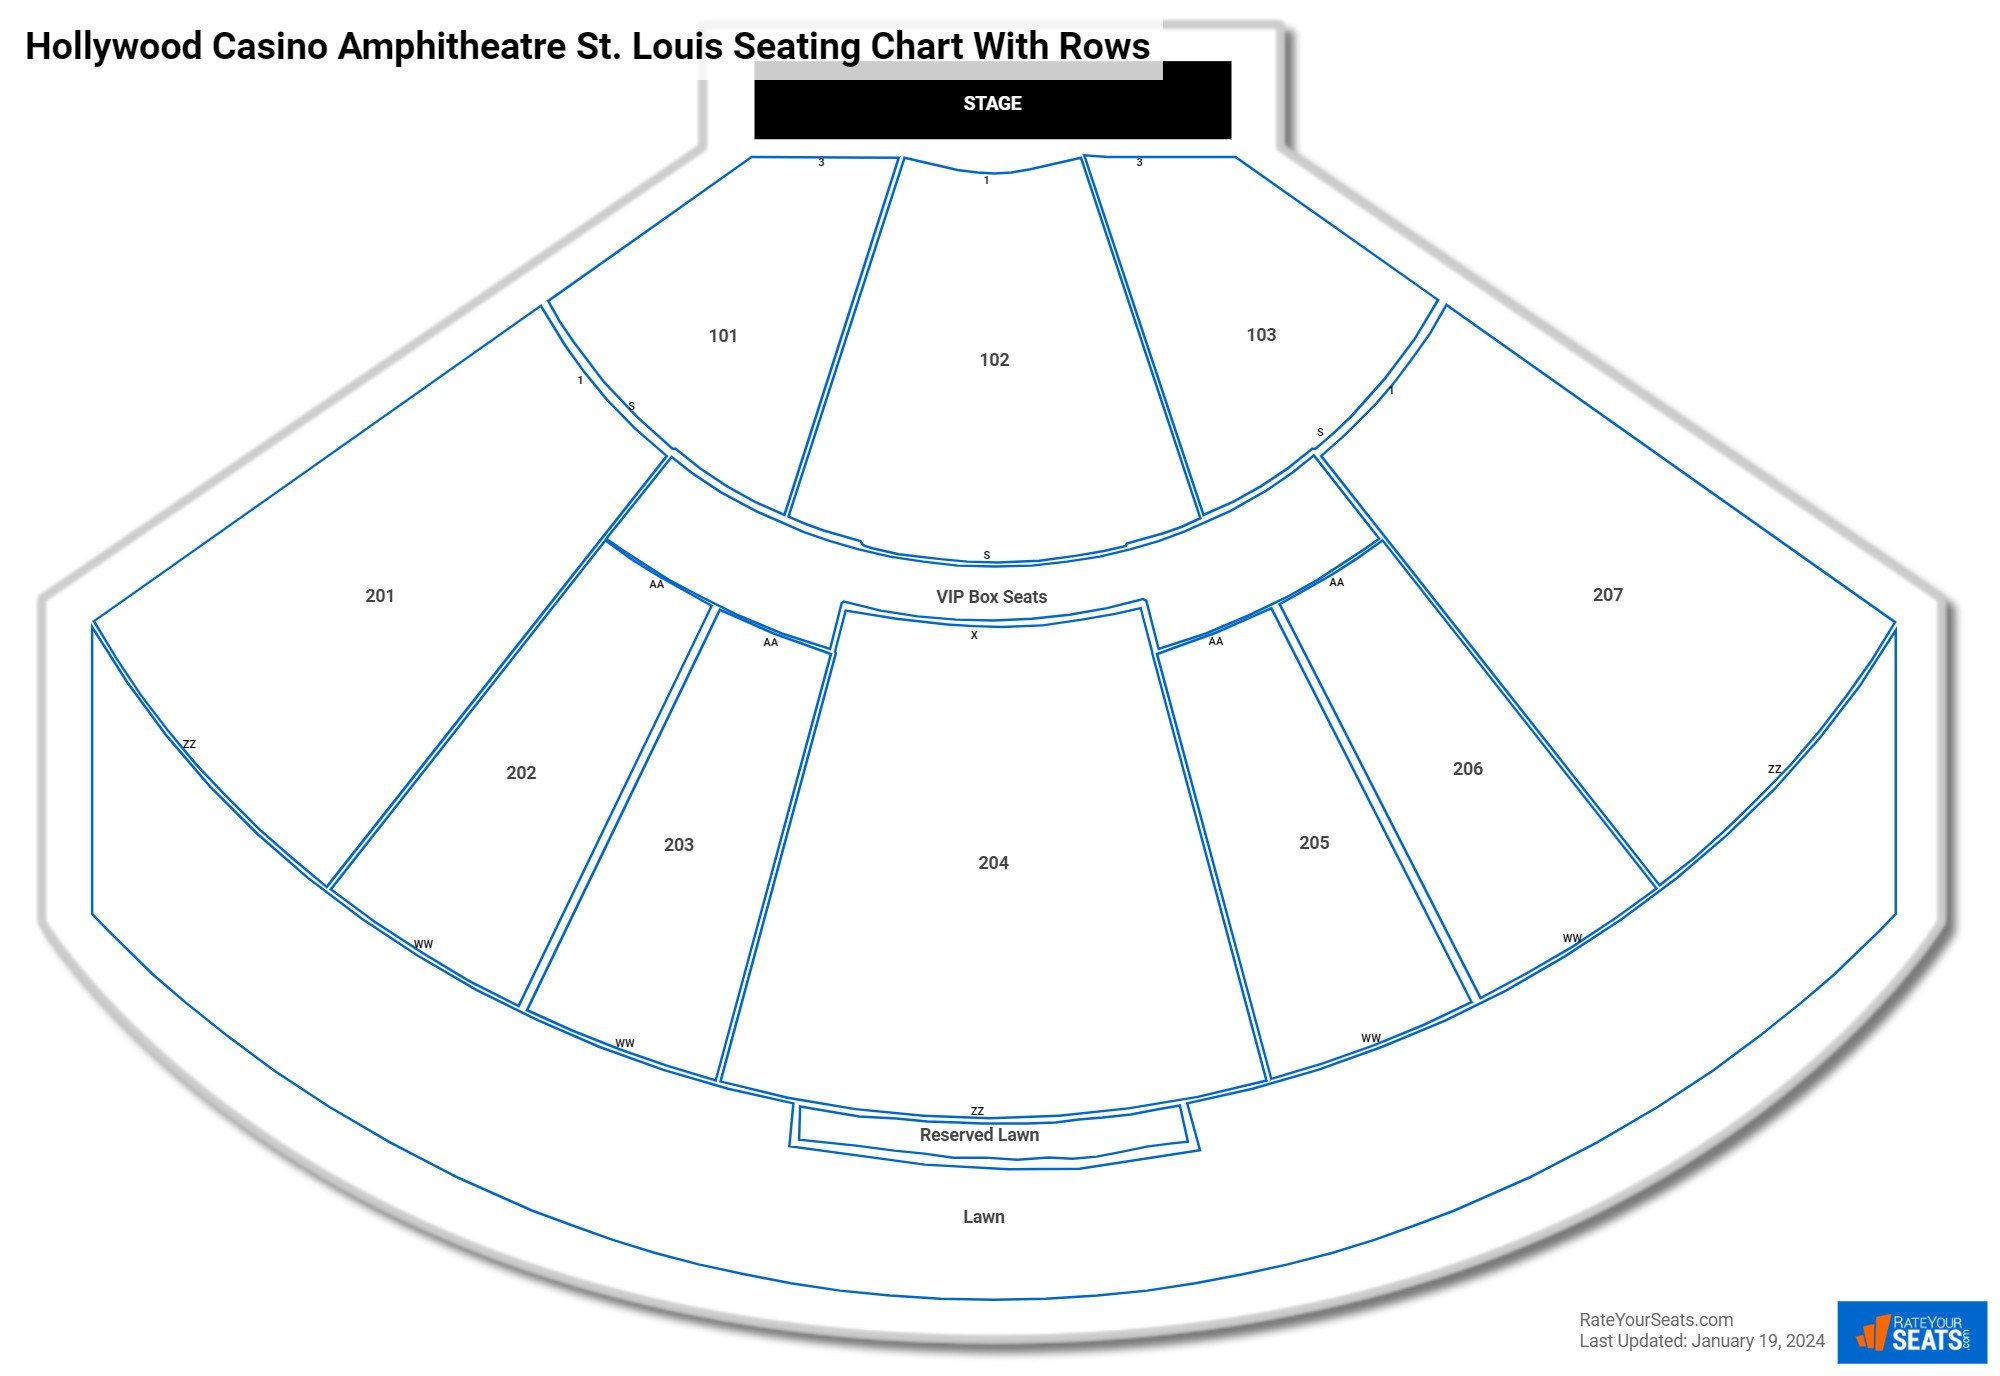 Hollywood Casino Amphitheatre St. Louis seating chart with row numbers